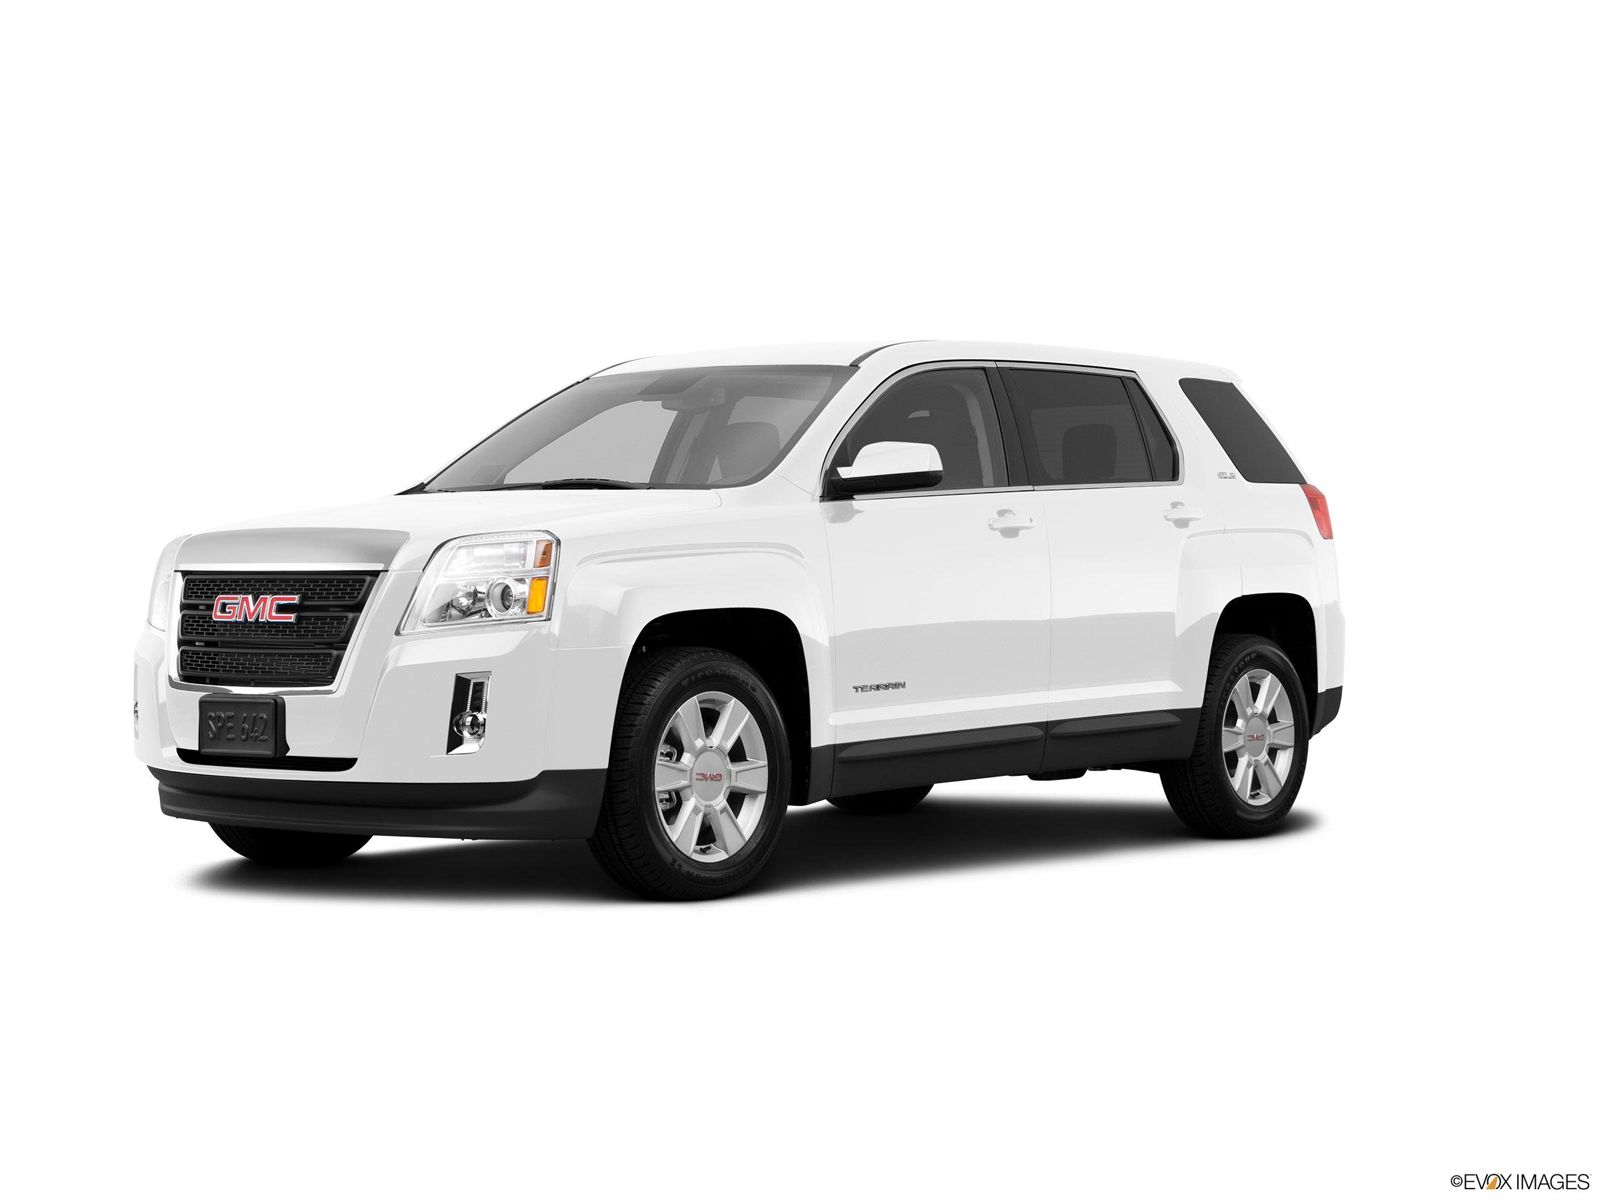 2013 GMC Terrain Research, photos, specs, and expertise | CarMax